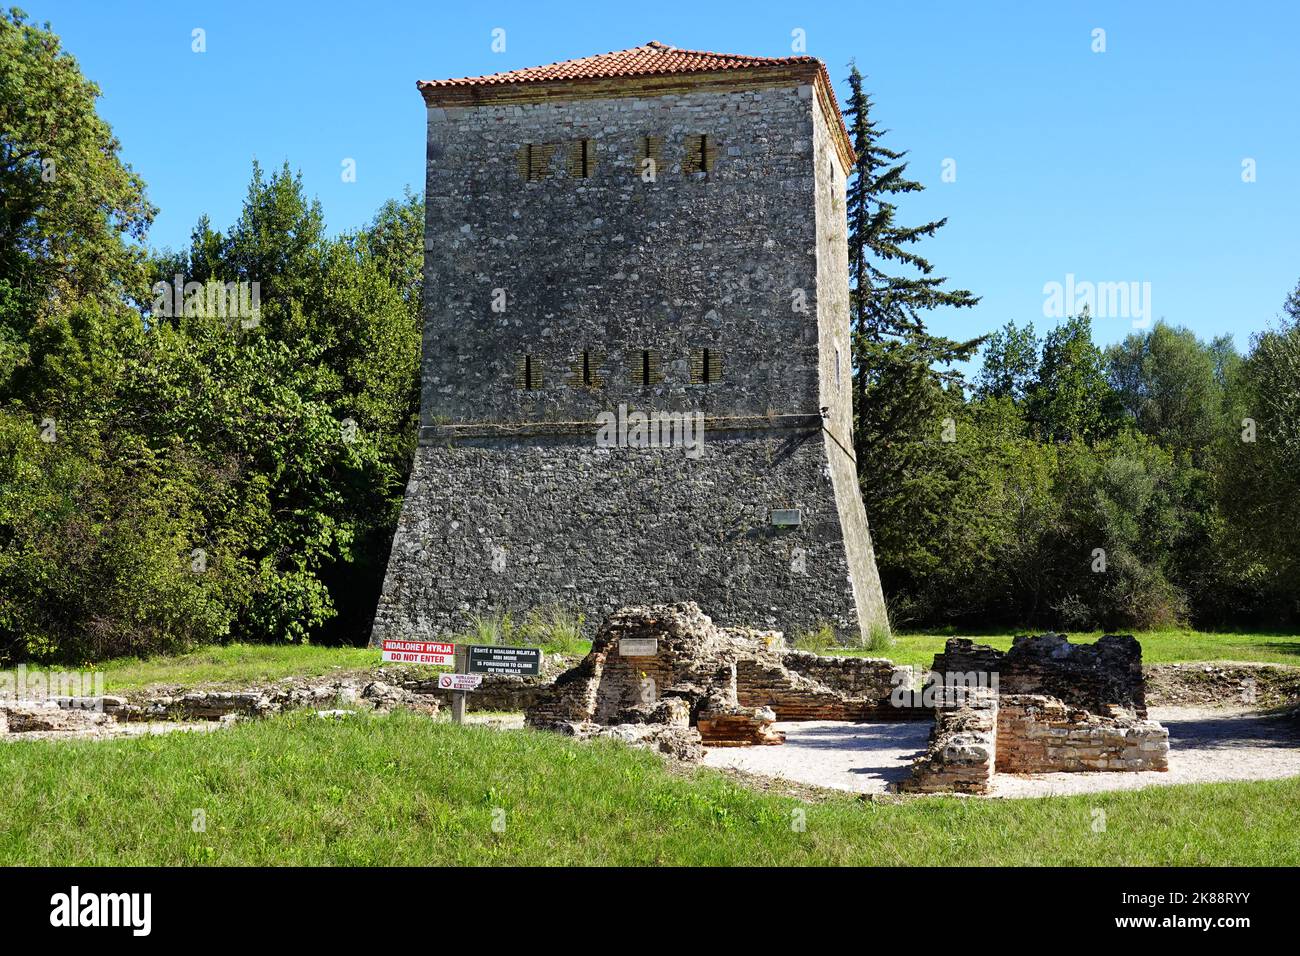 The Venetian Tower, Butrint, an ancient Greek and later Roman city and bishopric in Epirus, UNESCO World Heritage Site, Republic of Albania Stock Photo